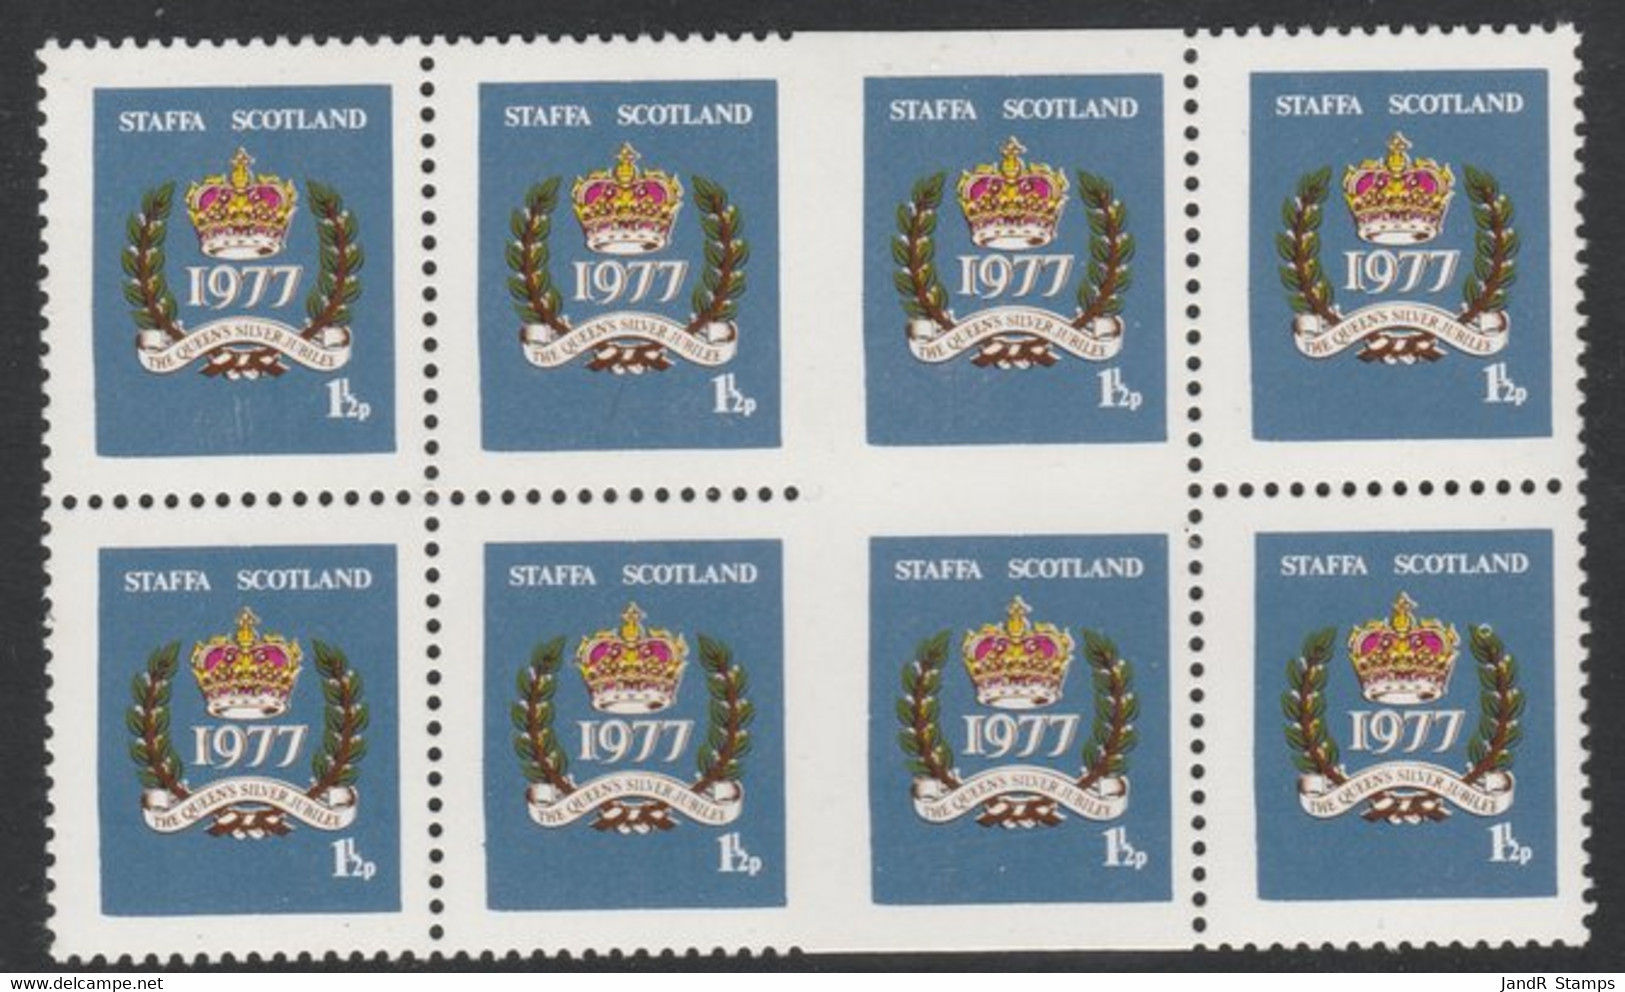 Staffa 1977 Silver Jubilee 1.5p In Block Of 8 Partially Imperforate U/m - Local Issues